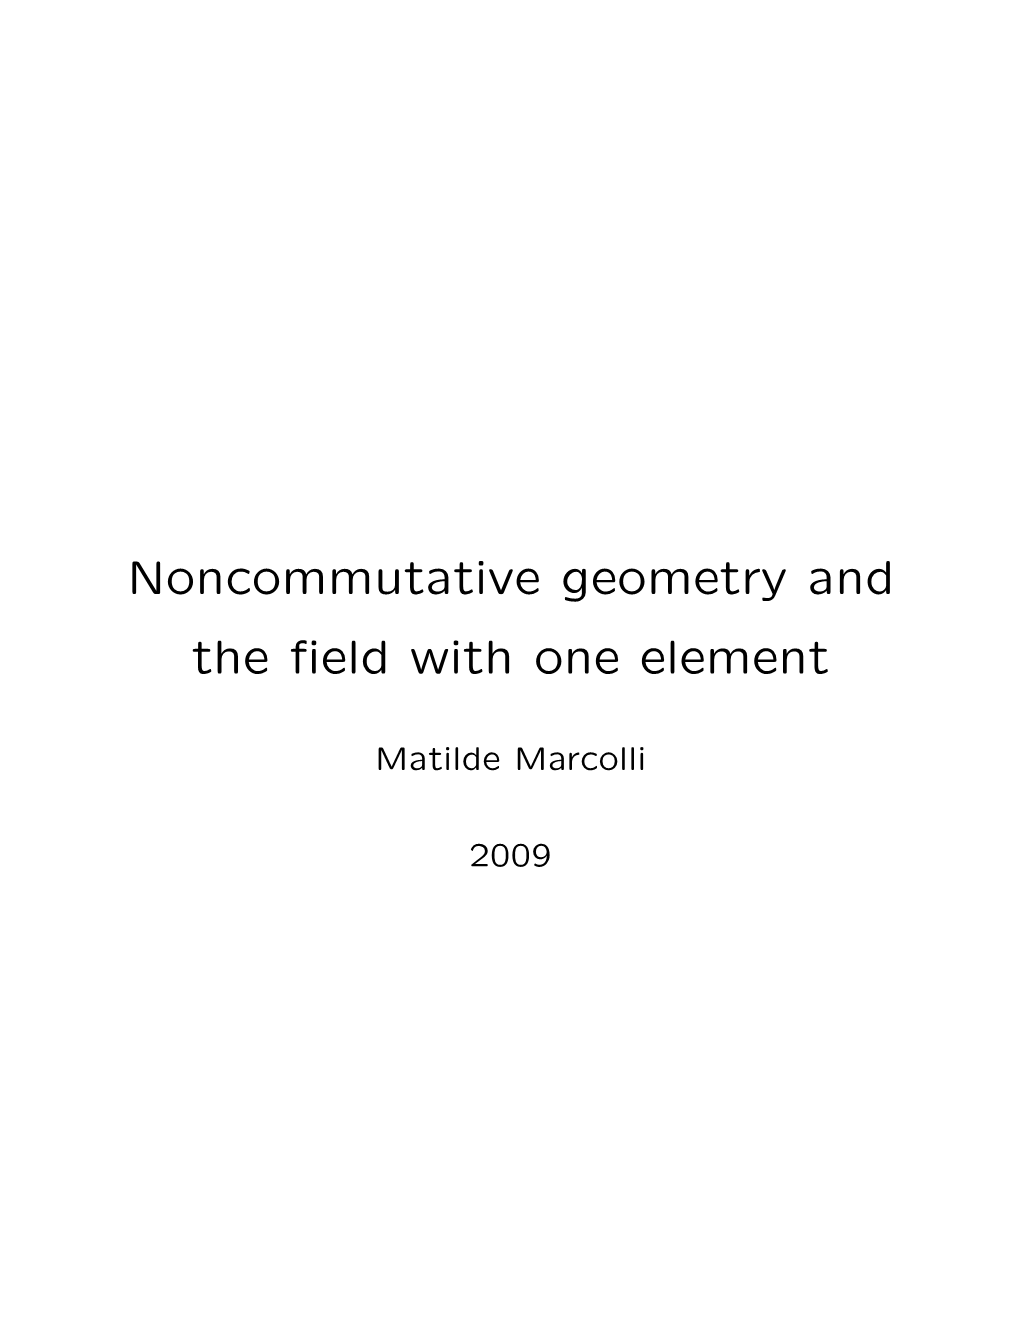 Noncommutative Geometry and the Field with One Element